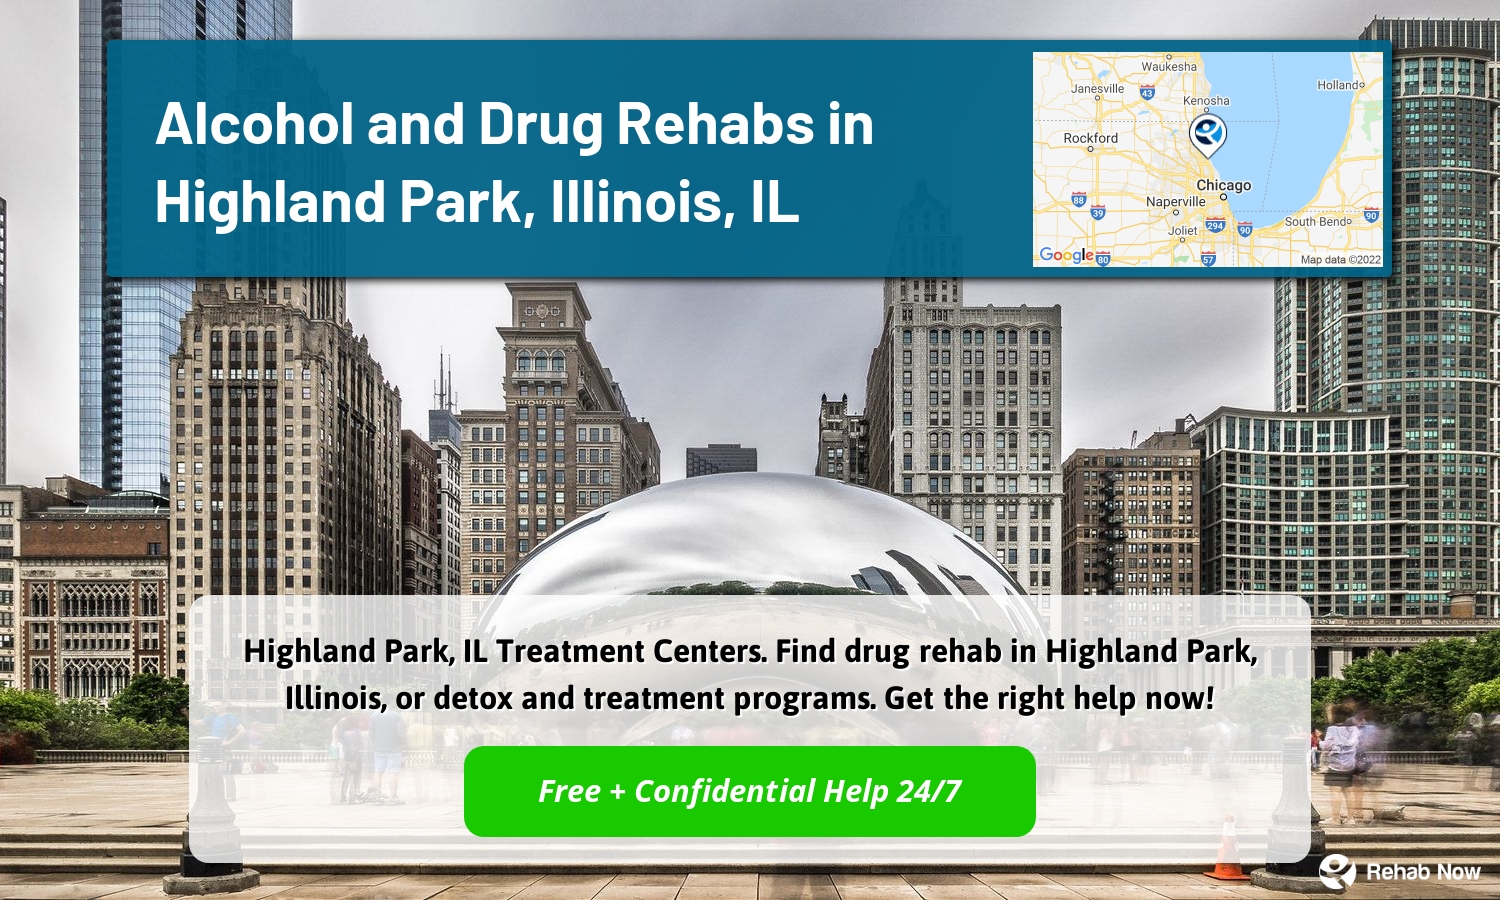 Highland Park, IL Treatment Centers. Find drug rehab in Highland Park, Illinois, or detox and treatment programs. Get the right help now!